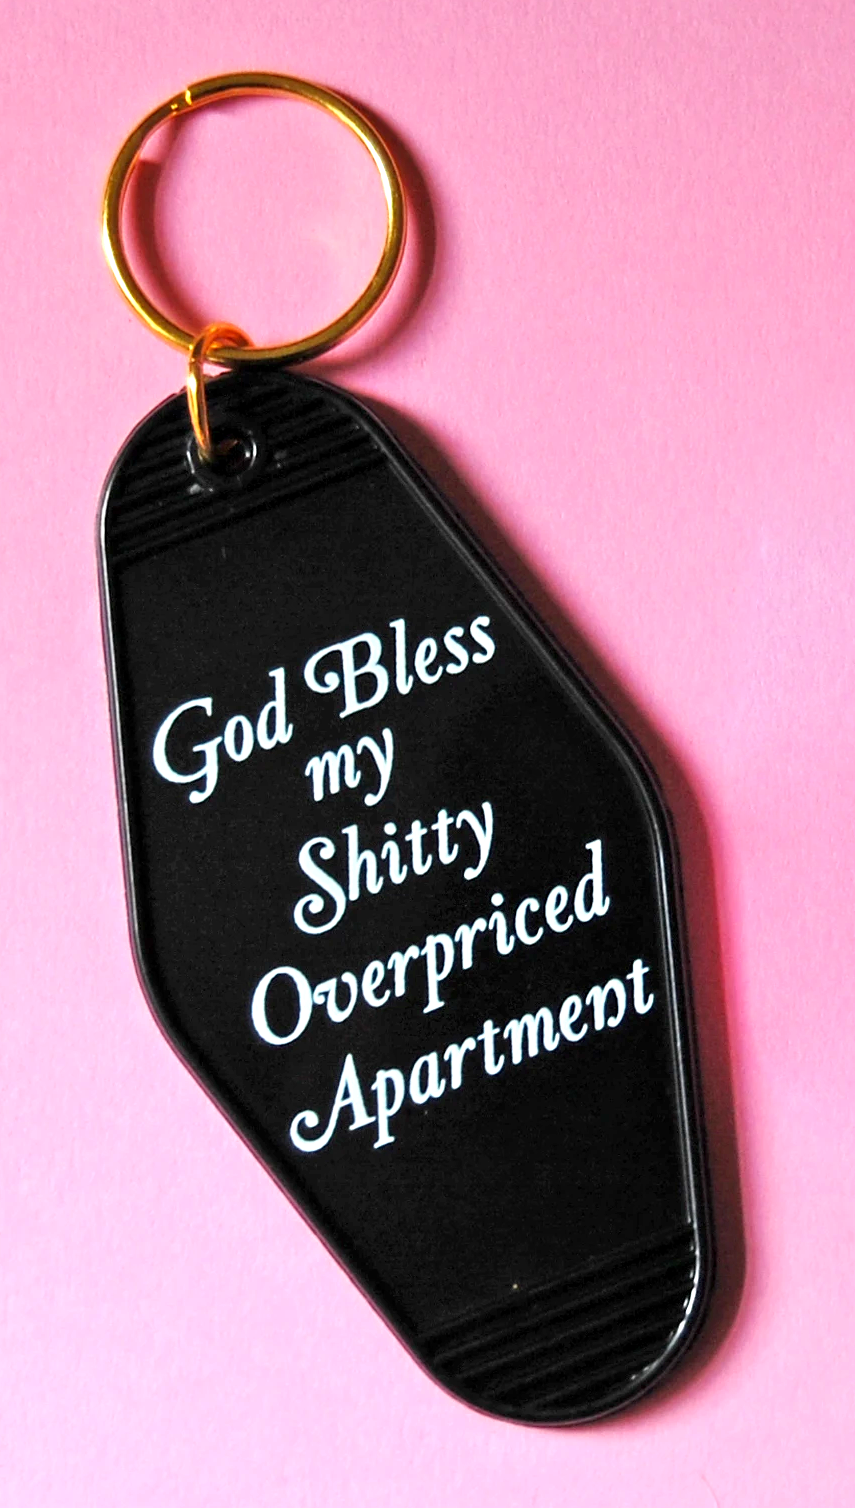 A SHOP OF THINGS GOD BLESS MY SH*TTY APARTMENT KEYCHAIN